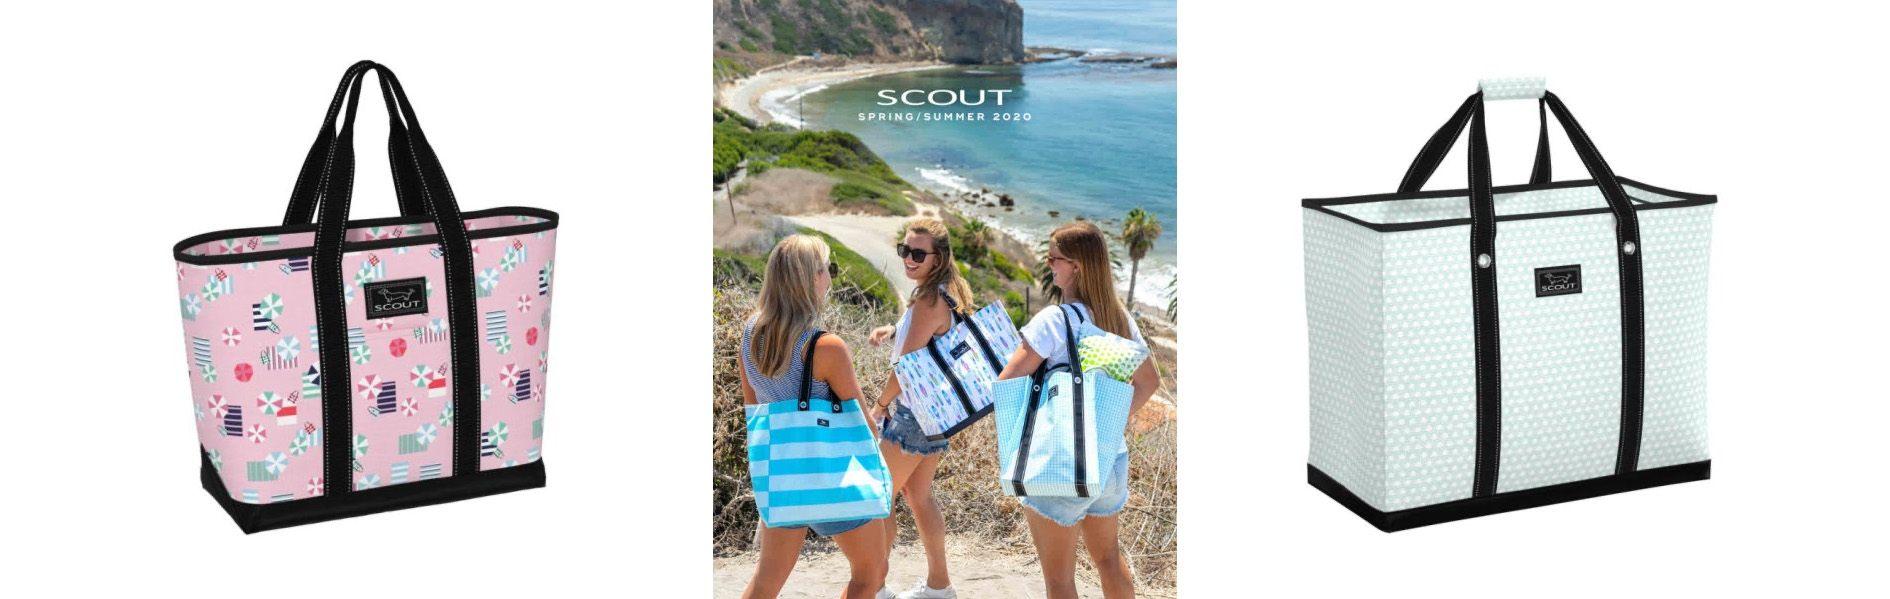 Scout lifestyle products slide 1